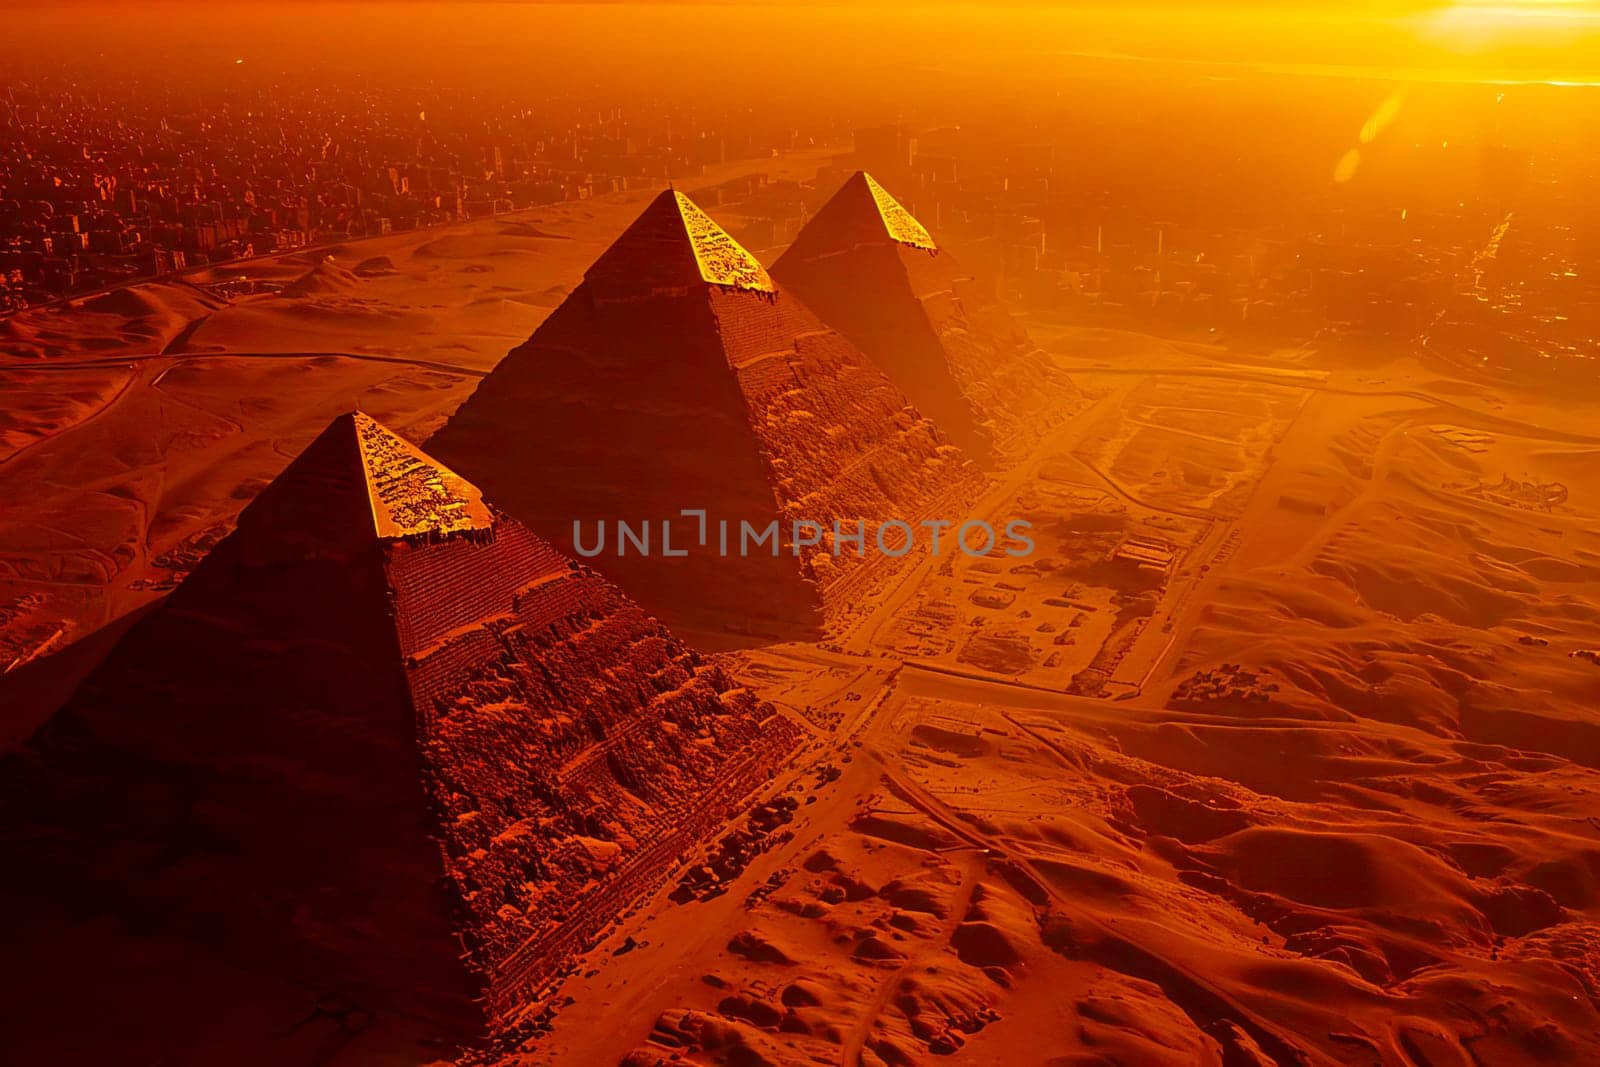 Aerial view of three Egyptian pyramids in the desert glowing in the warm hues of the setting sun.